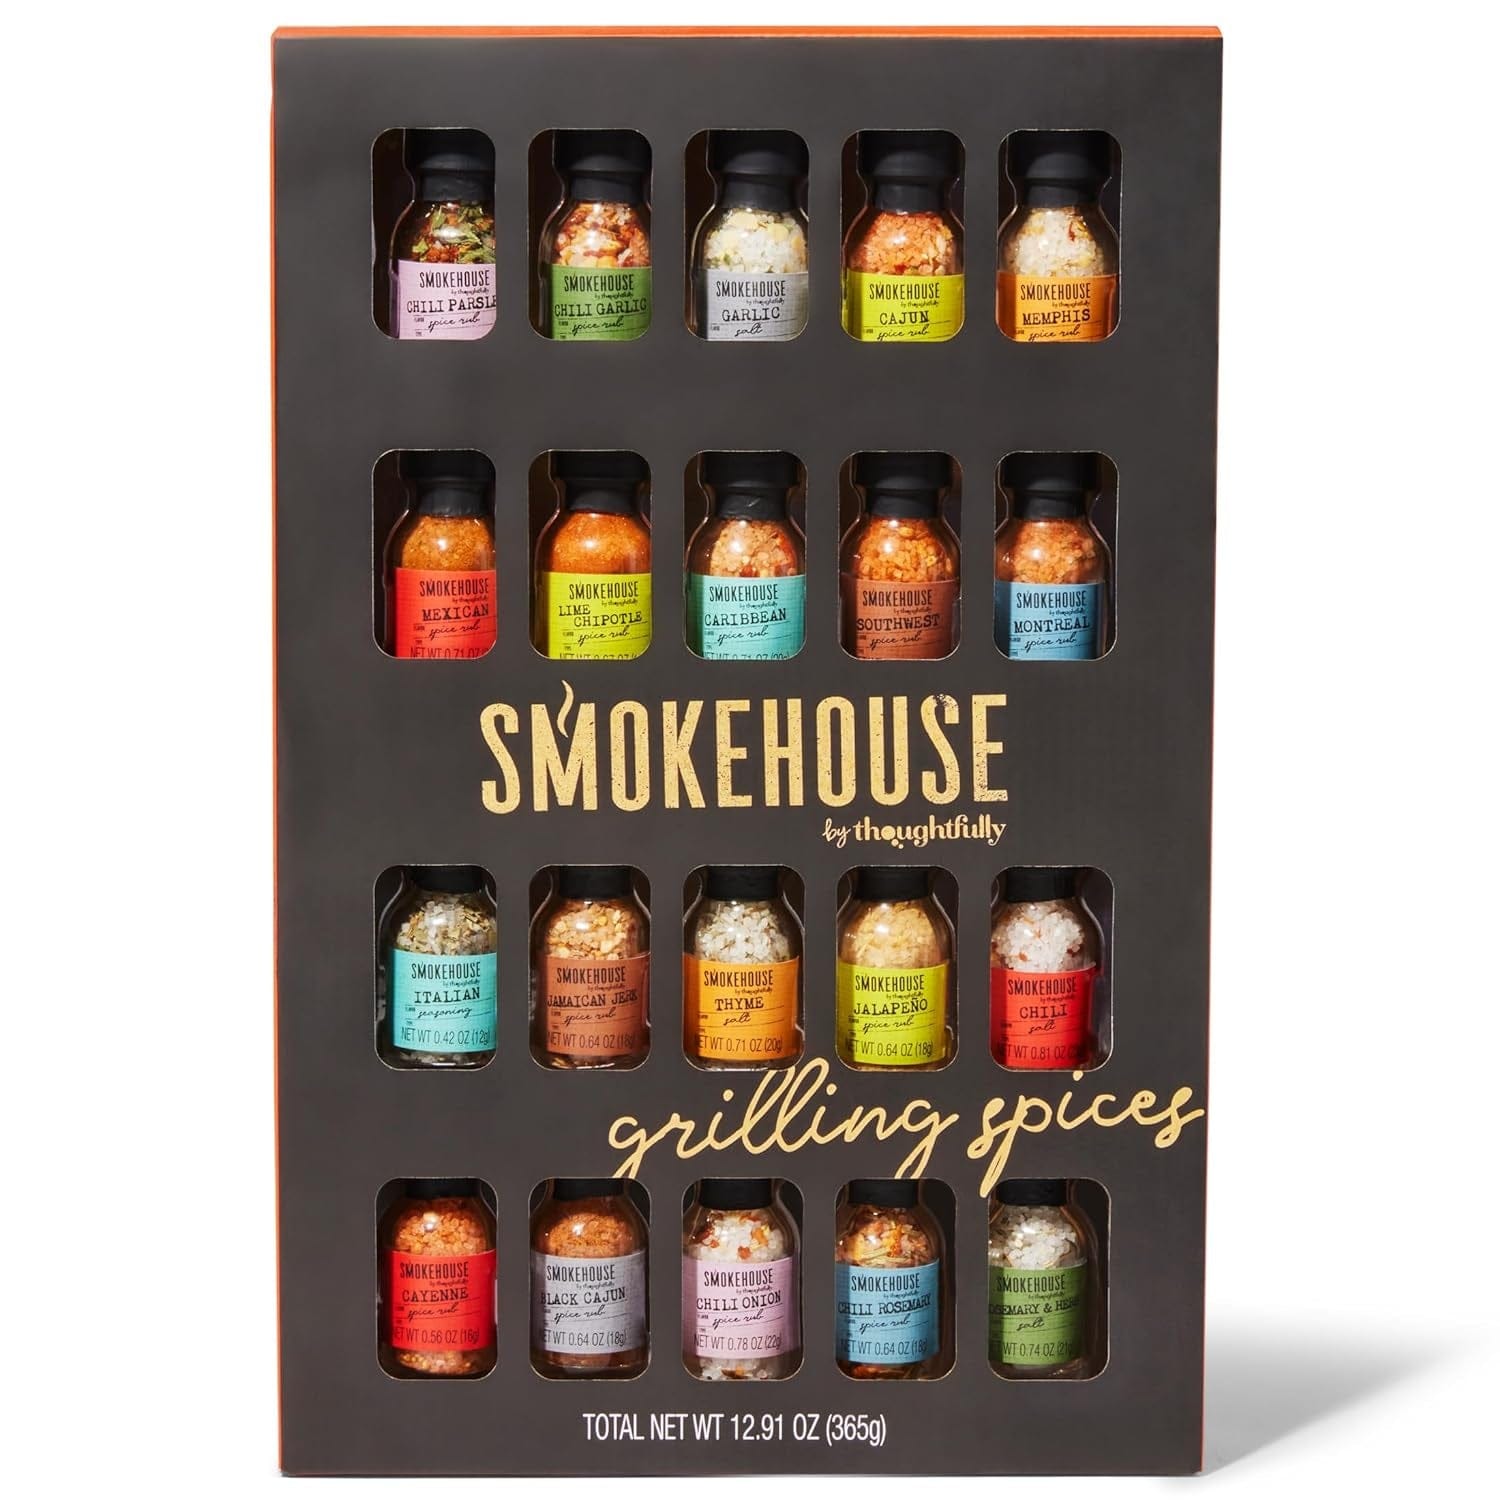 GeckoCustom Smokehouse by  Ultimate Grilling Spice Set, Grill Seasoning Gift Set Flavors Include Chili Garlic, Rosemary and Herb, Lime Chipotle, Cajun Seasoning and More, Pack of 20